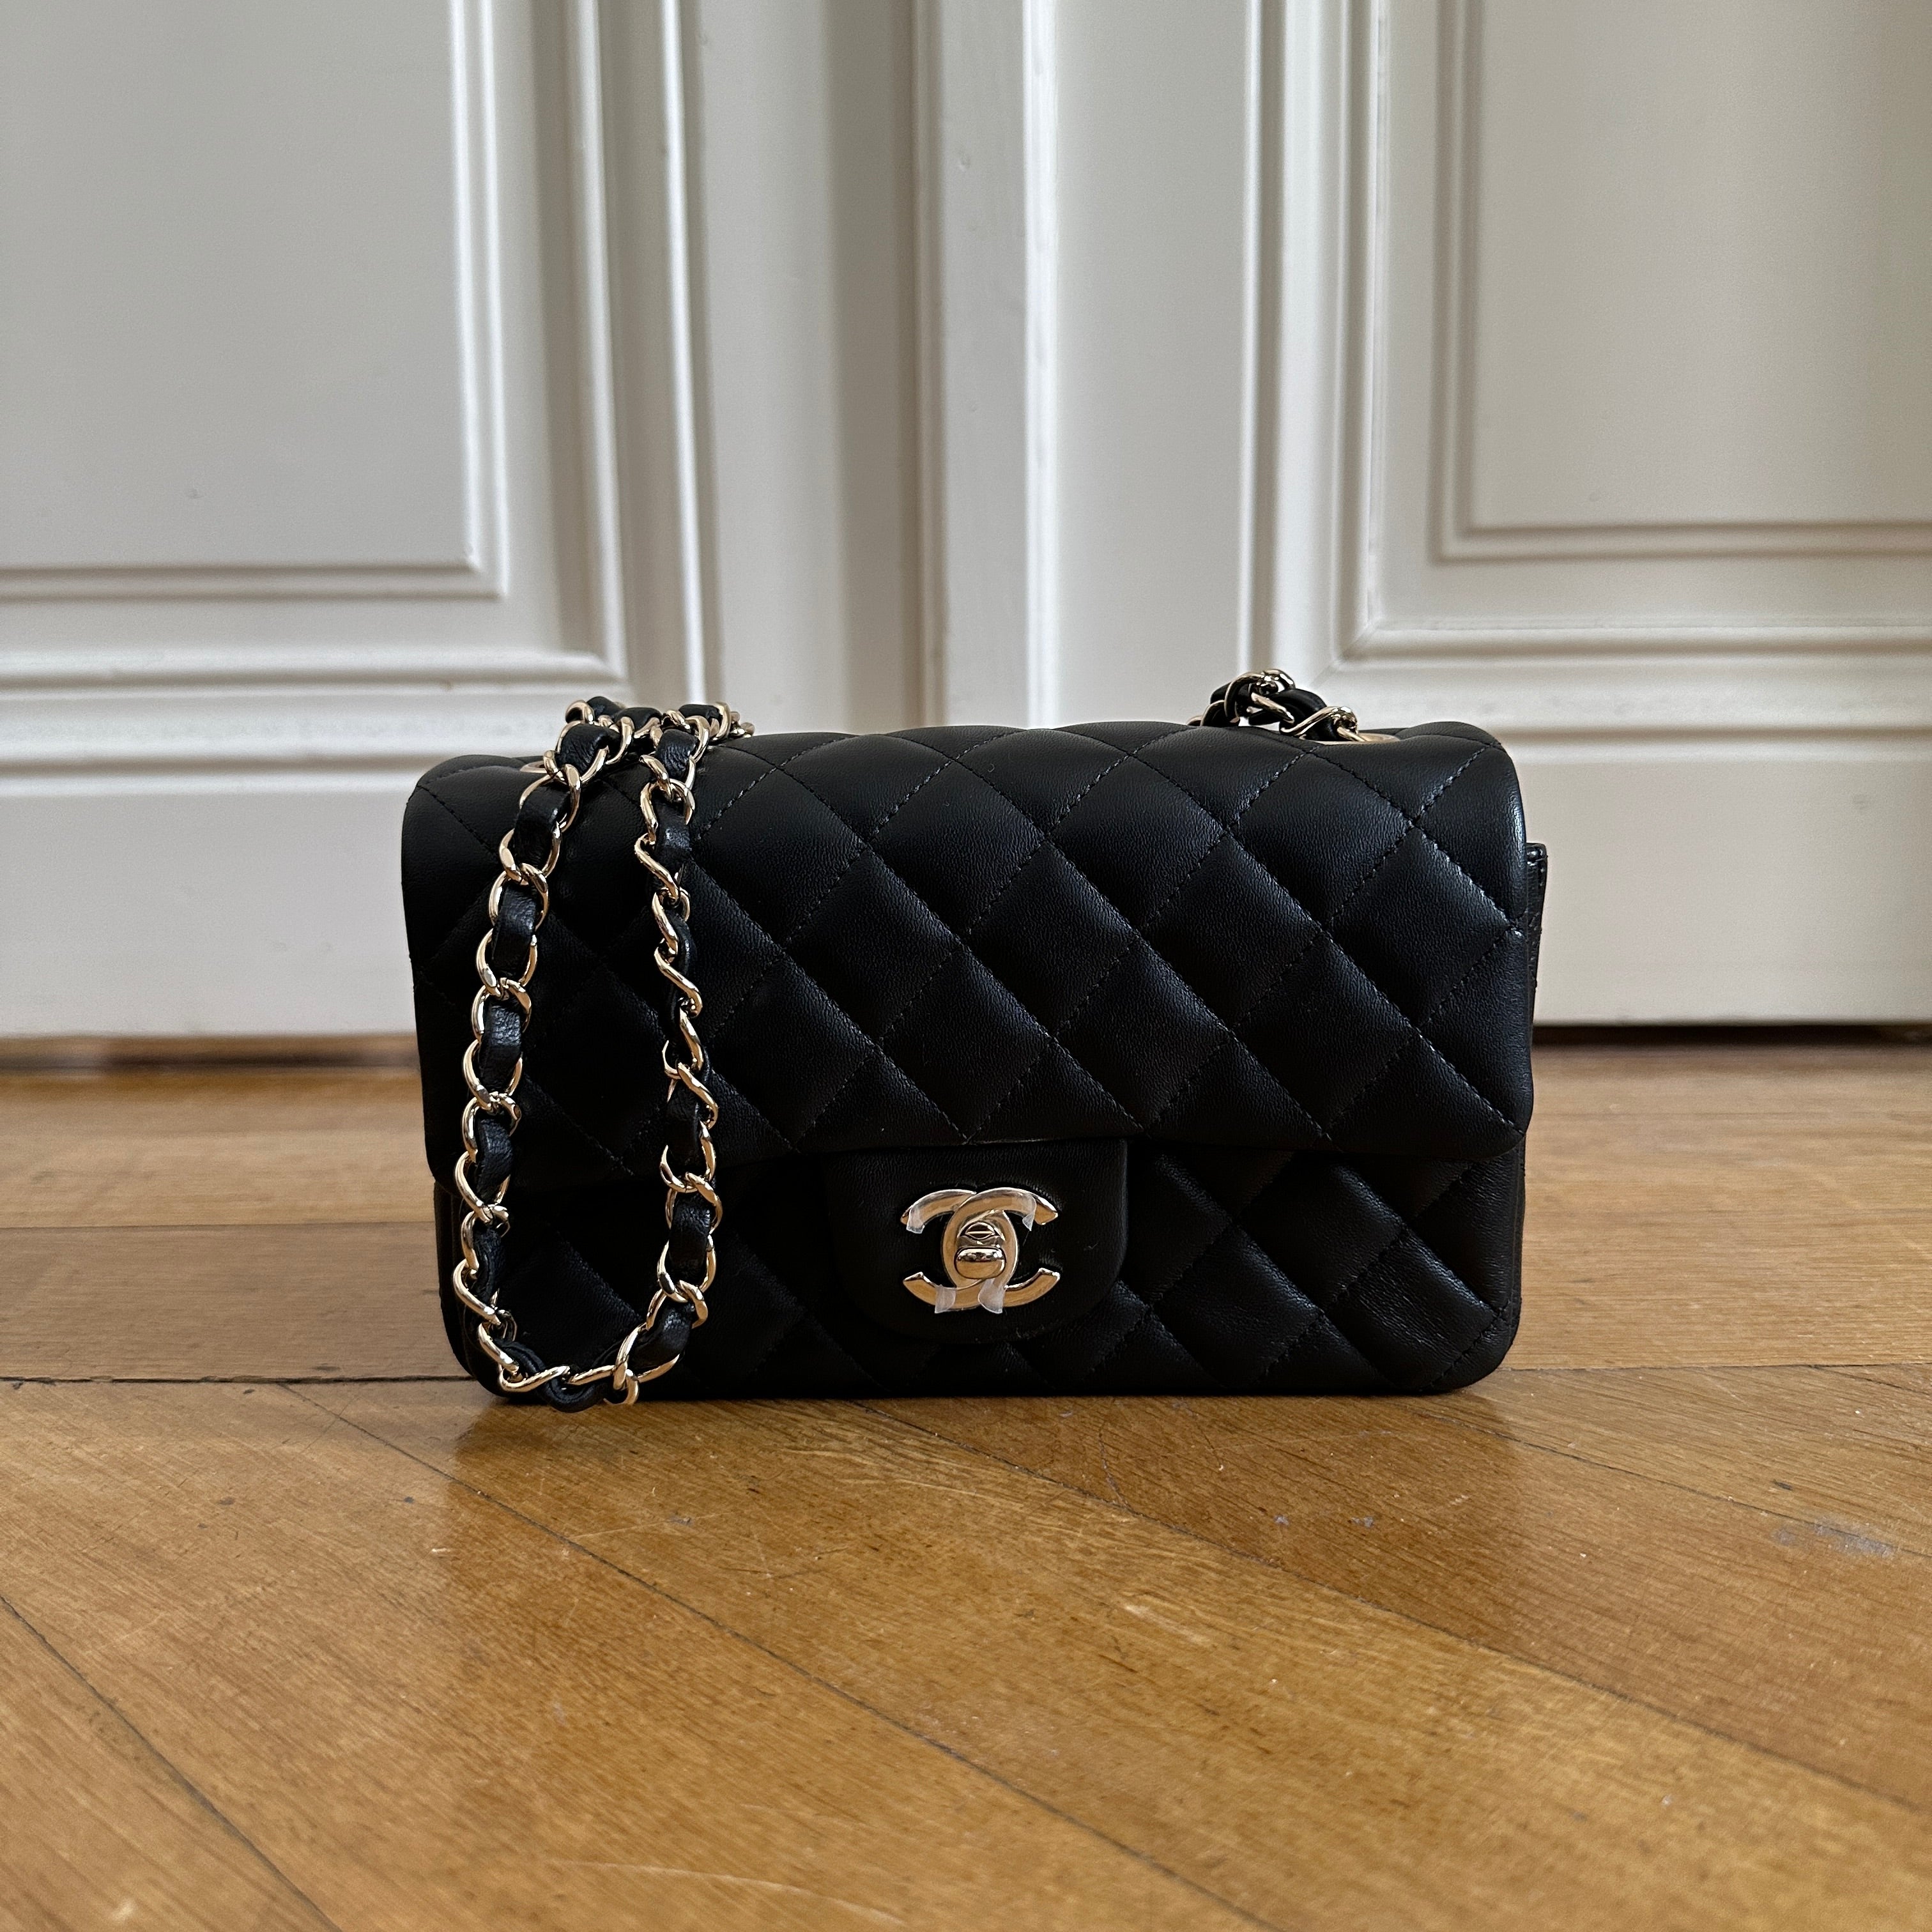 CHANEL Small 19 Black Goatskin Flap Bag Mixed Hardware – AYAINLOVE CURATED  LUXURIES